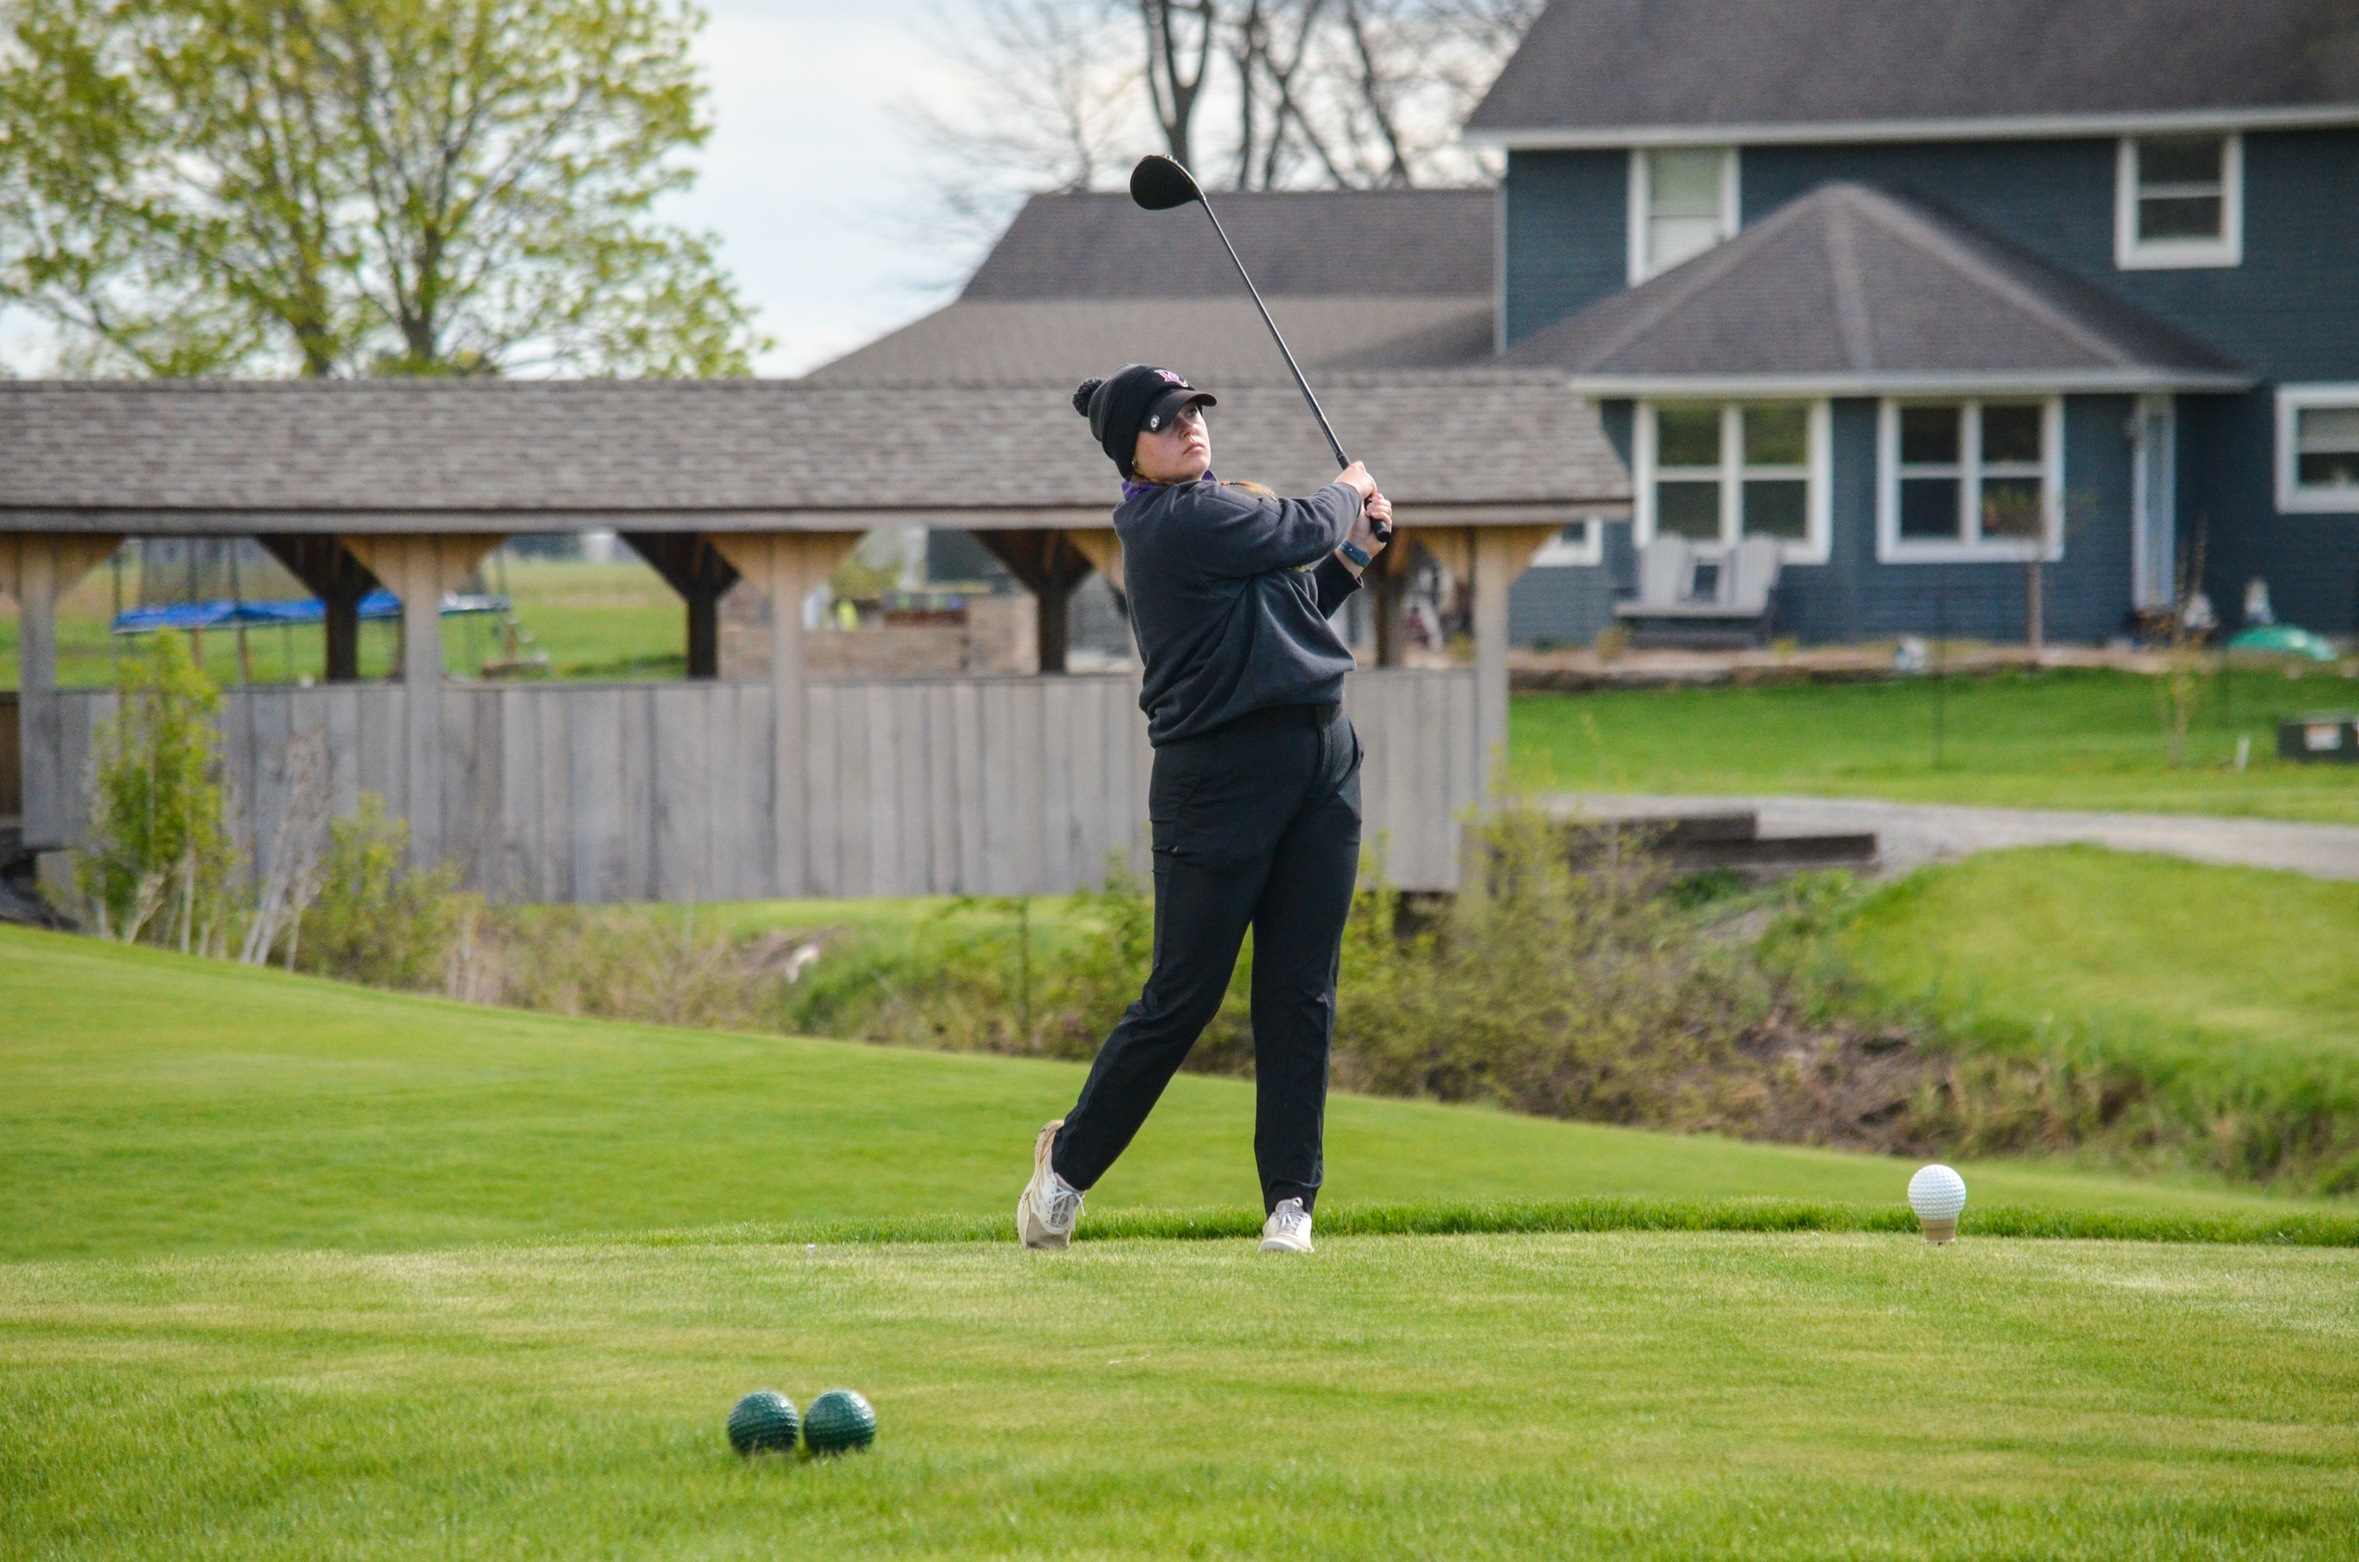 Boroff earns first-career win with surge in second round at Yellow Jacket Spring Invitational